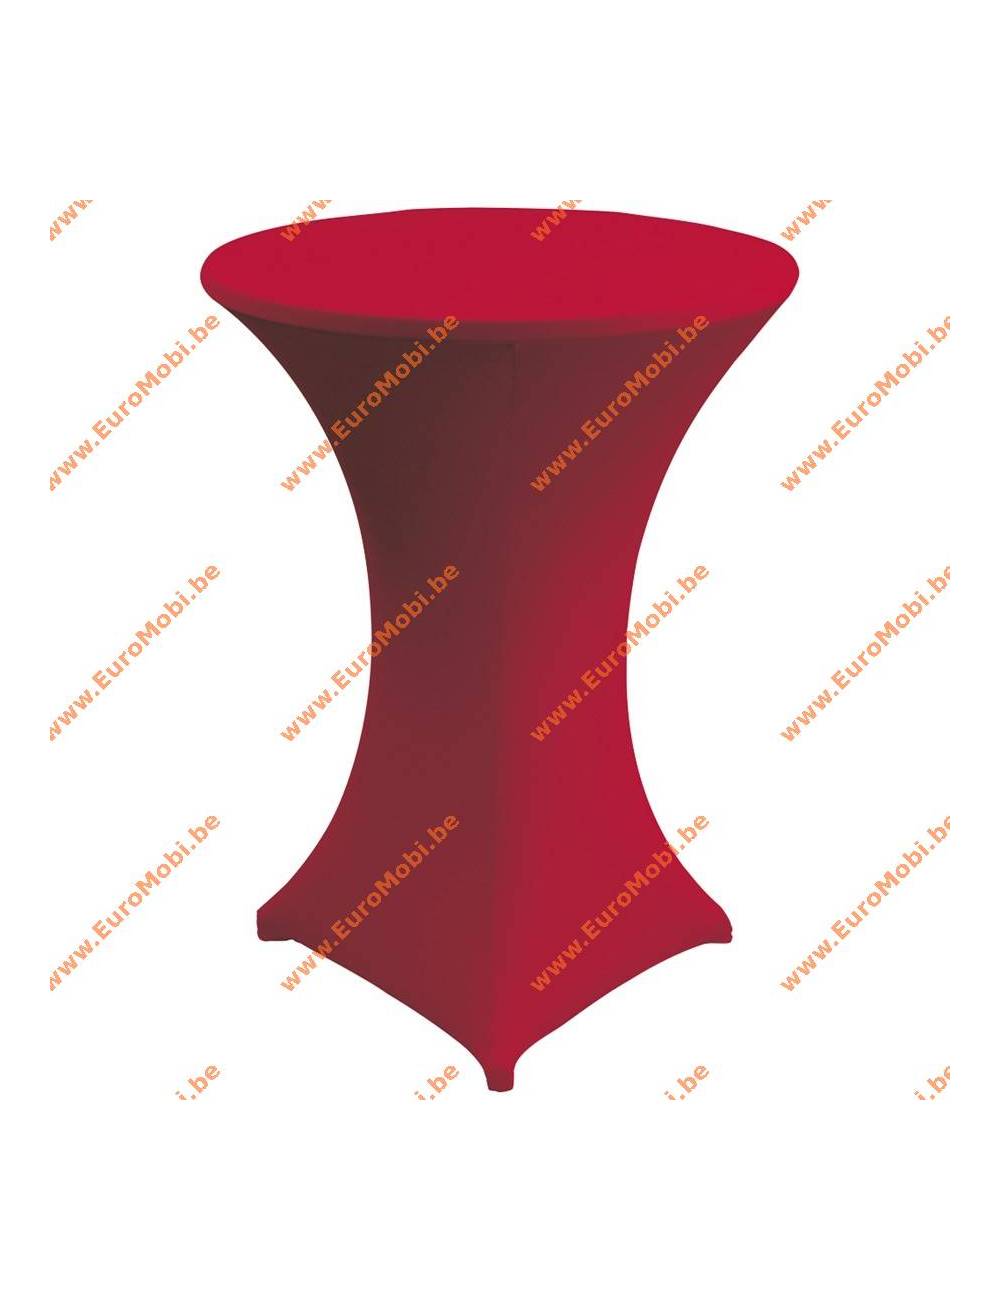 Cover and top stretch for standing table round clear red